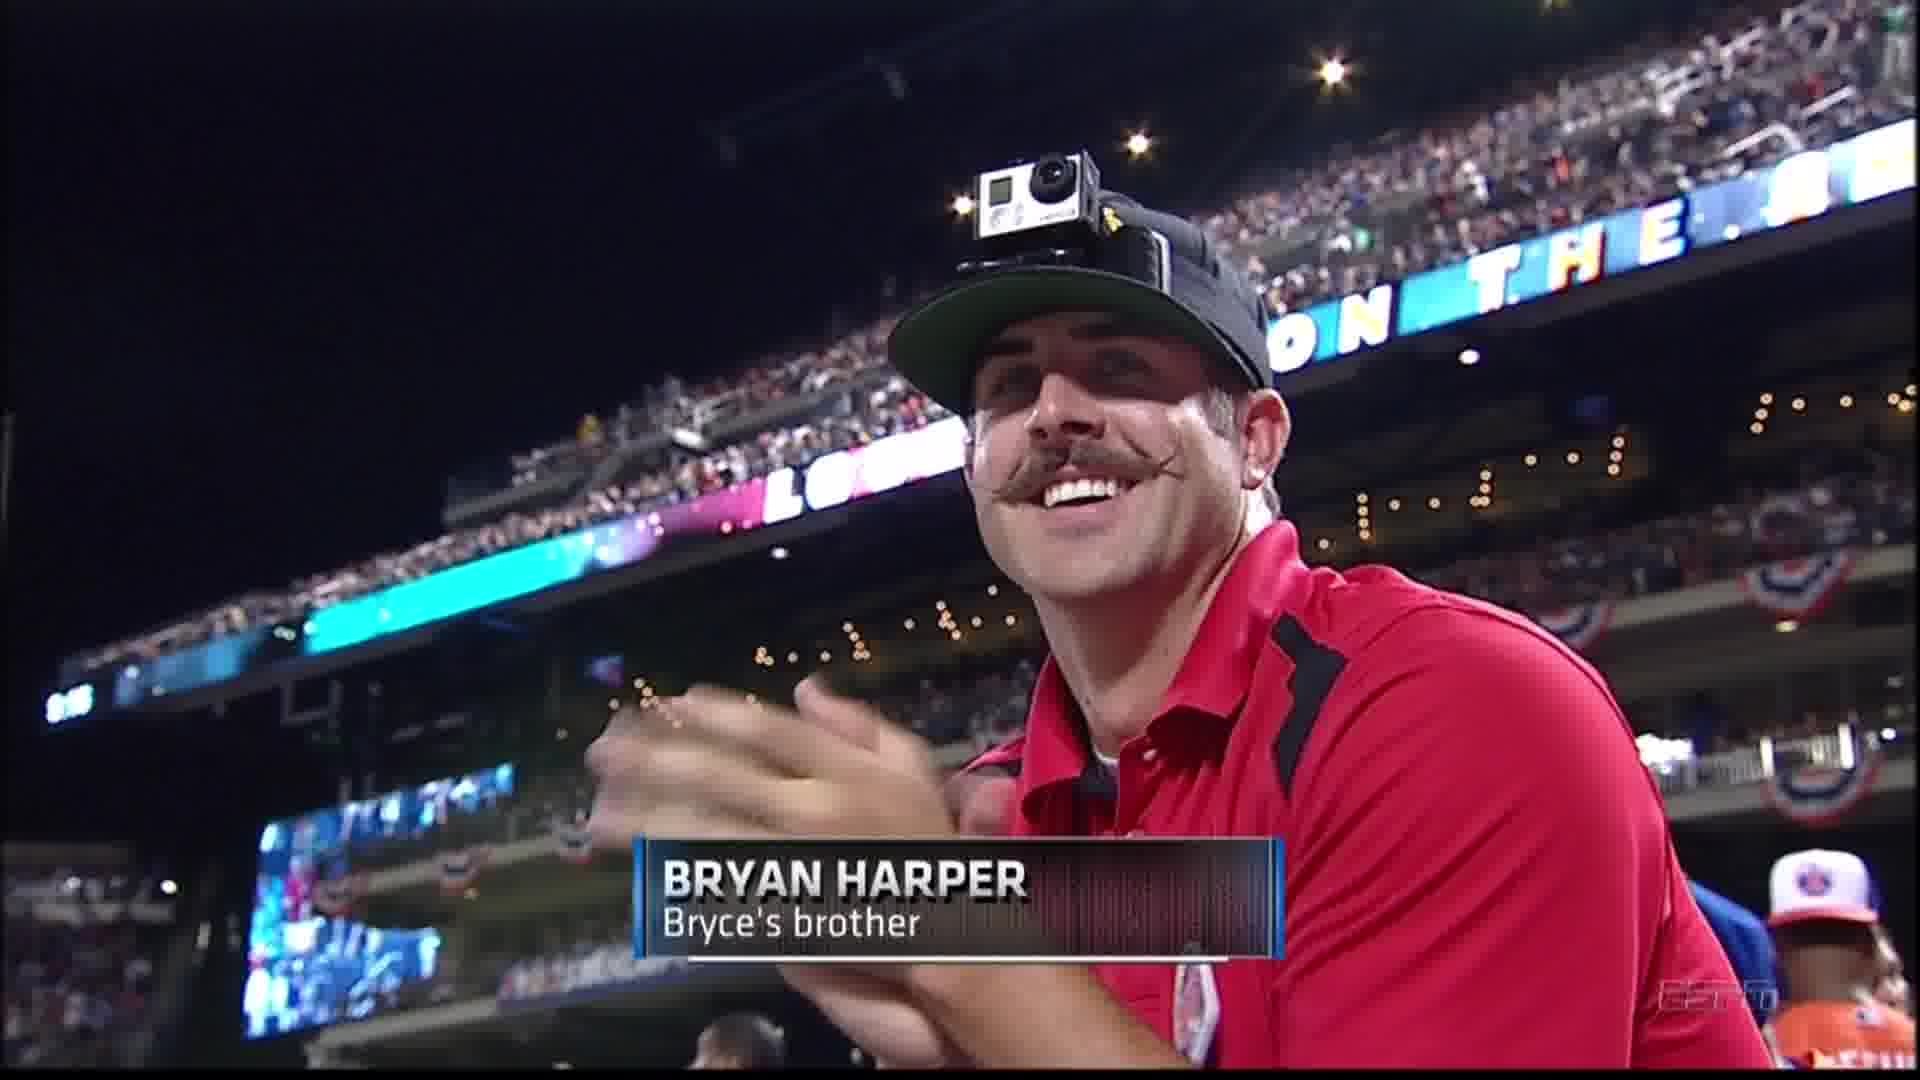 Bryce Harpers Brother Has a Mustache That Requires Waxing